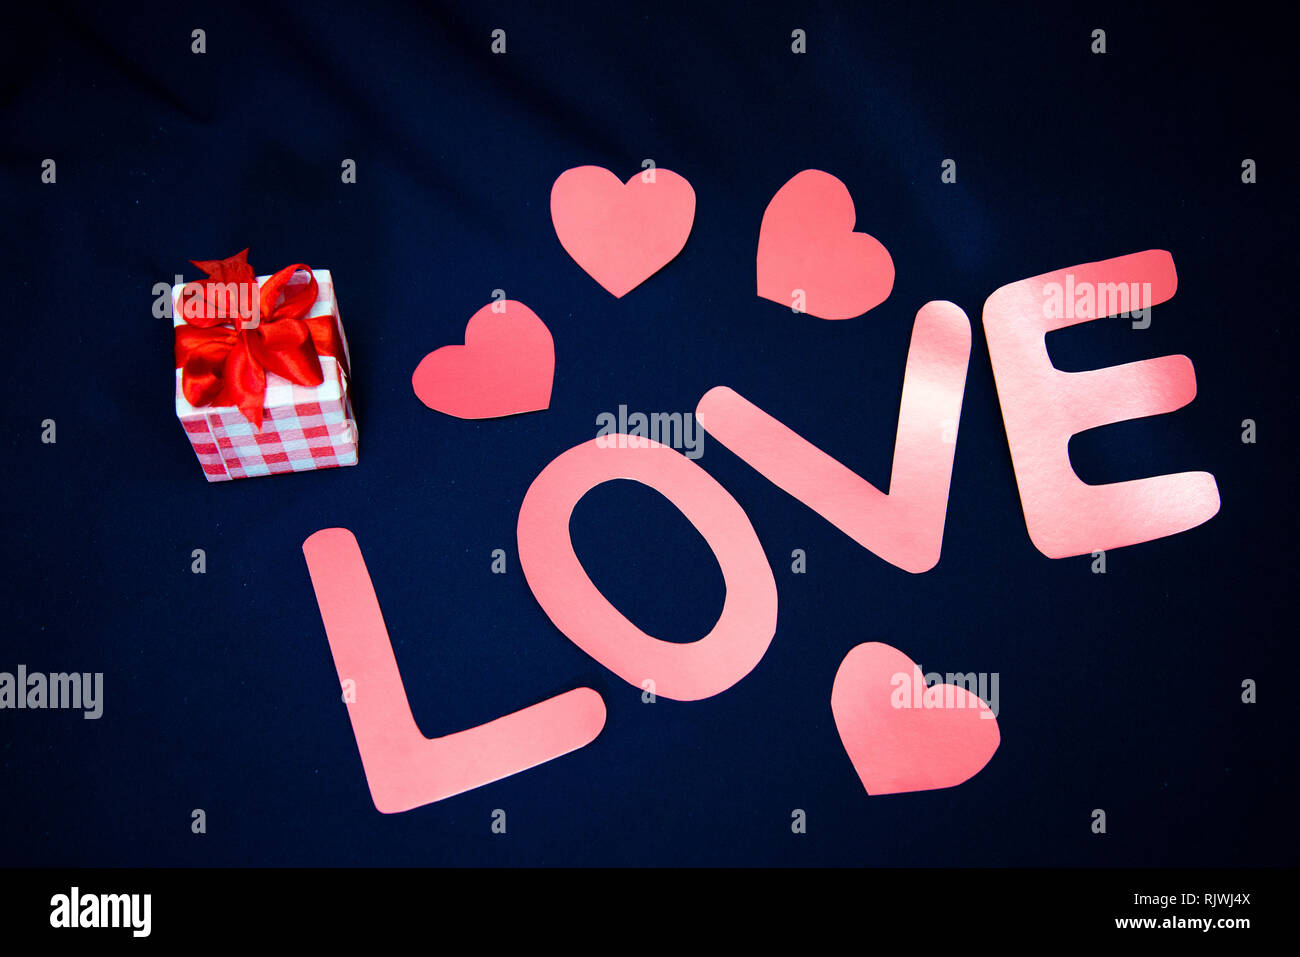 The word love written in pink on a black background photo – Free